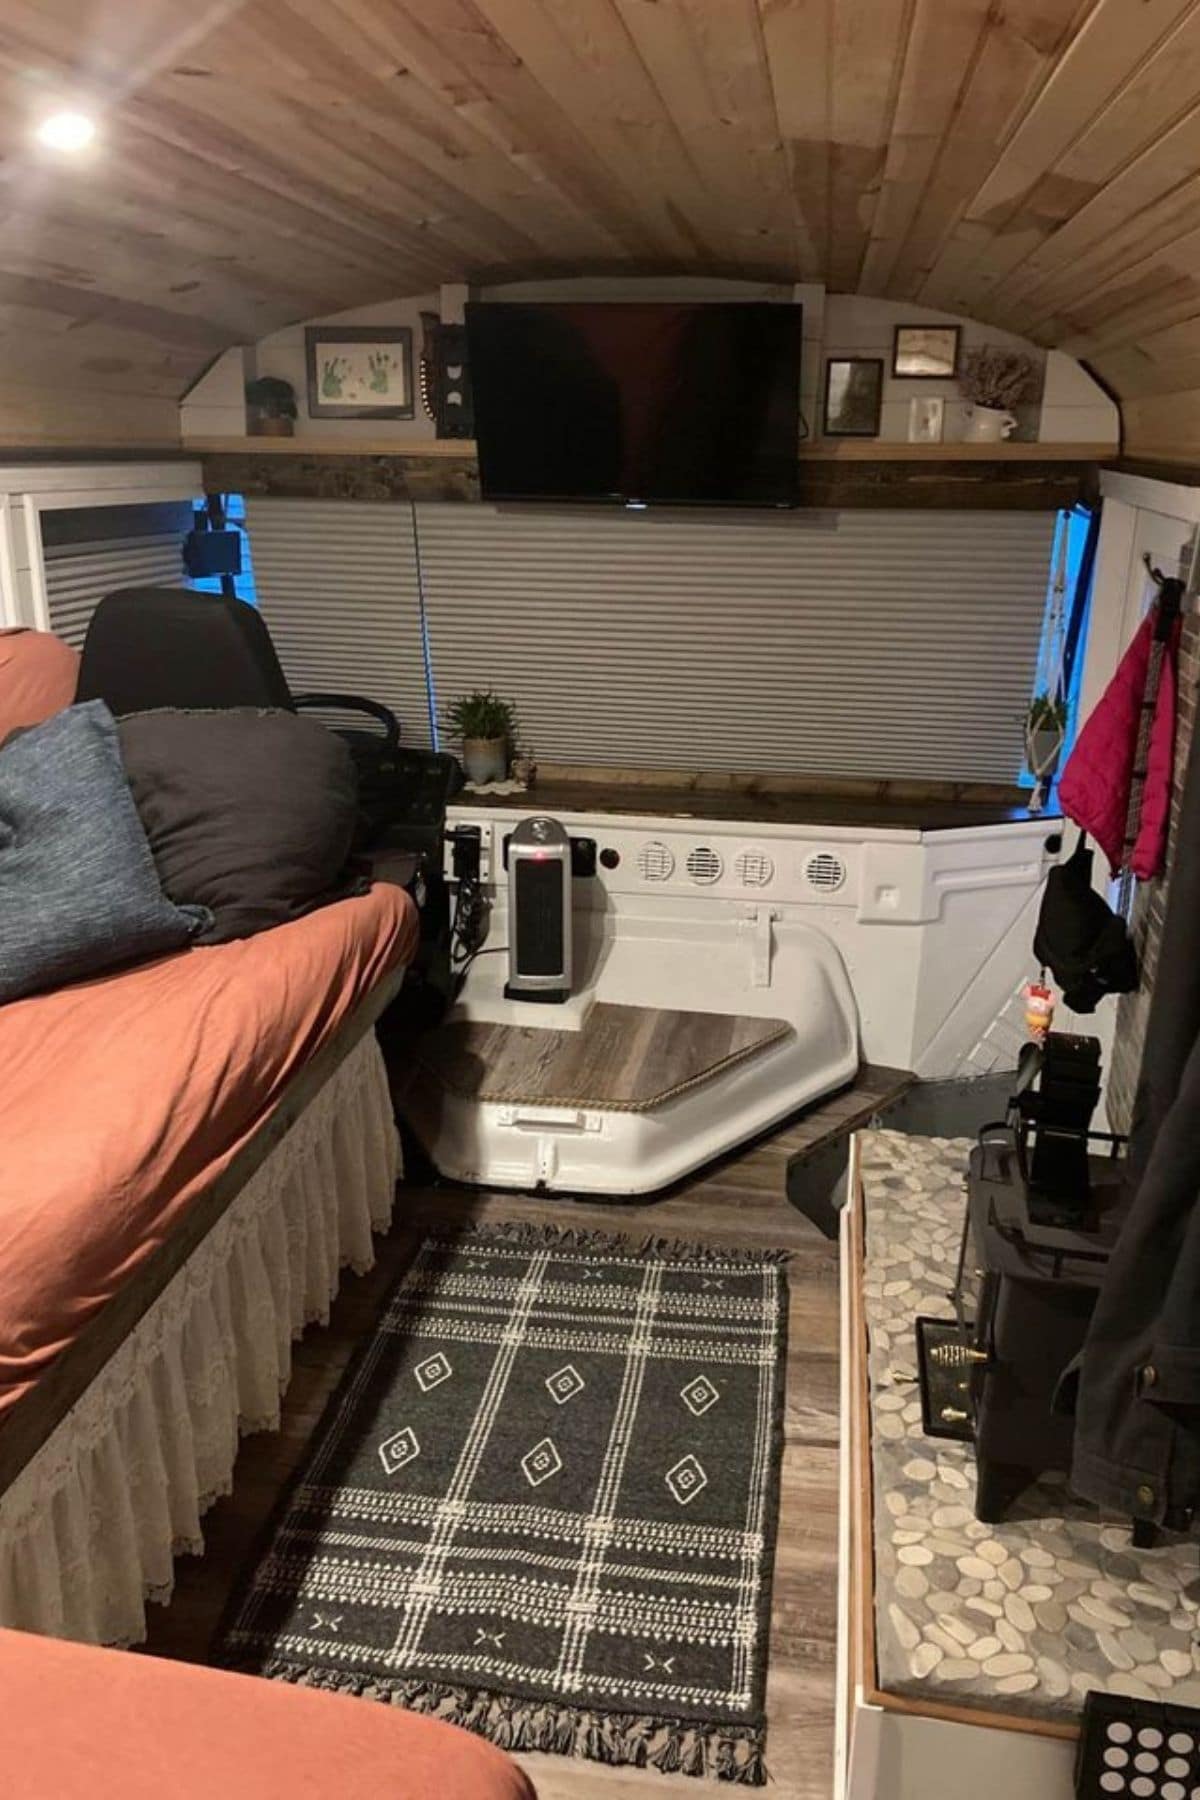 Living area of skoolie with bed on left and clothing on right